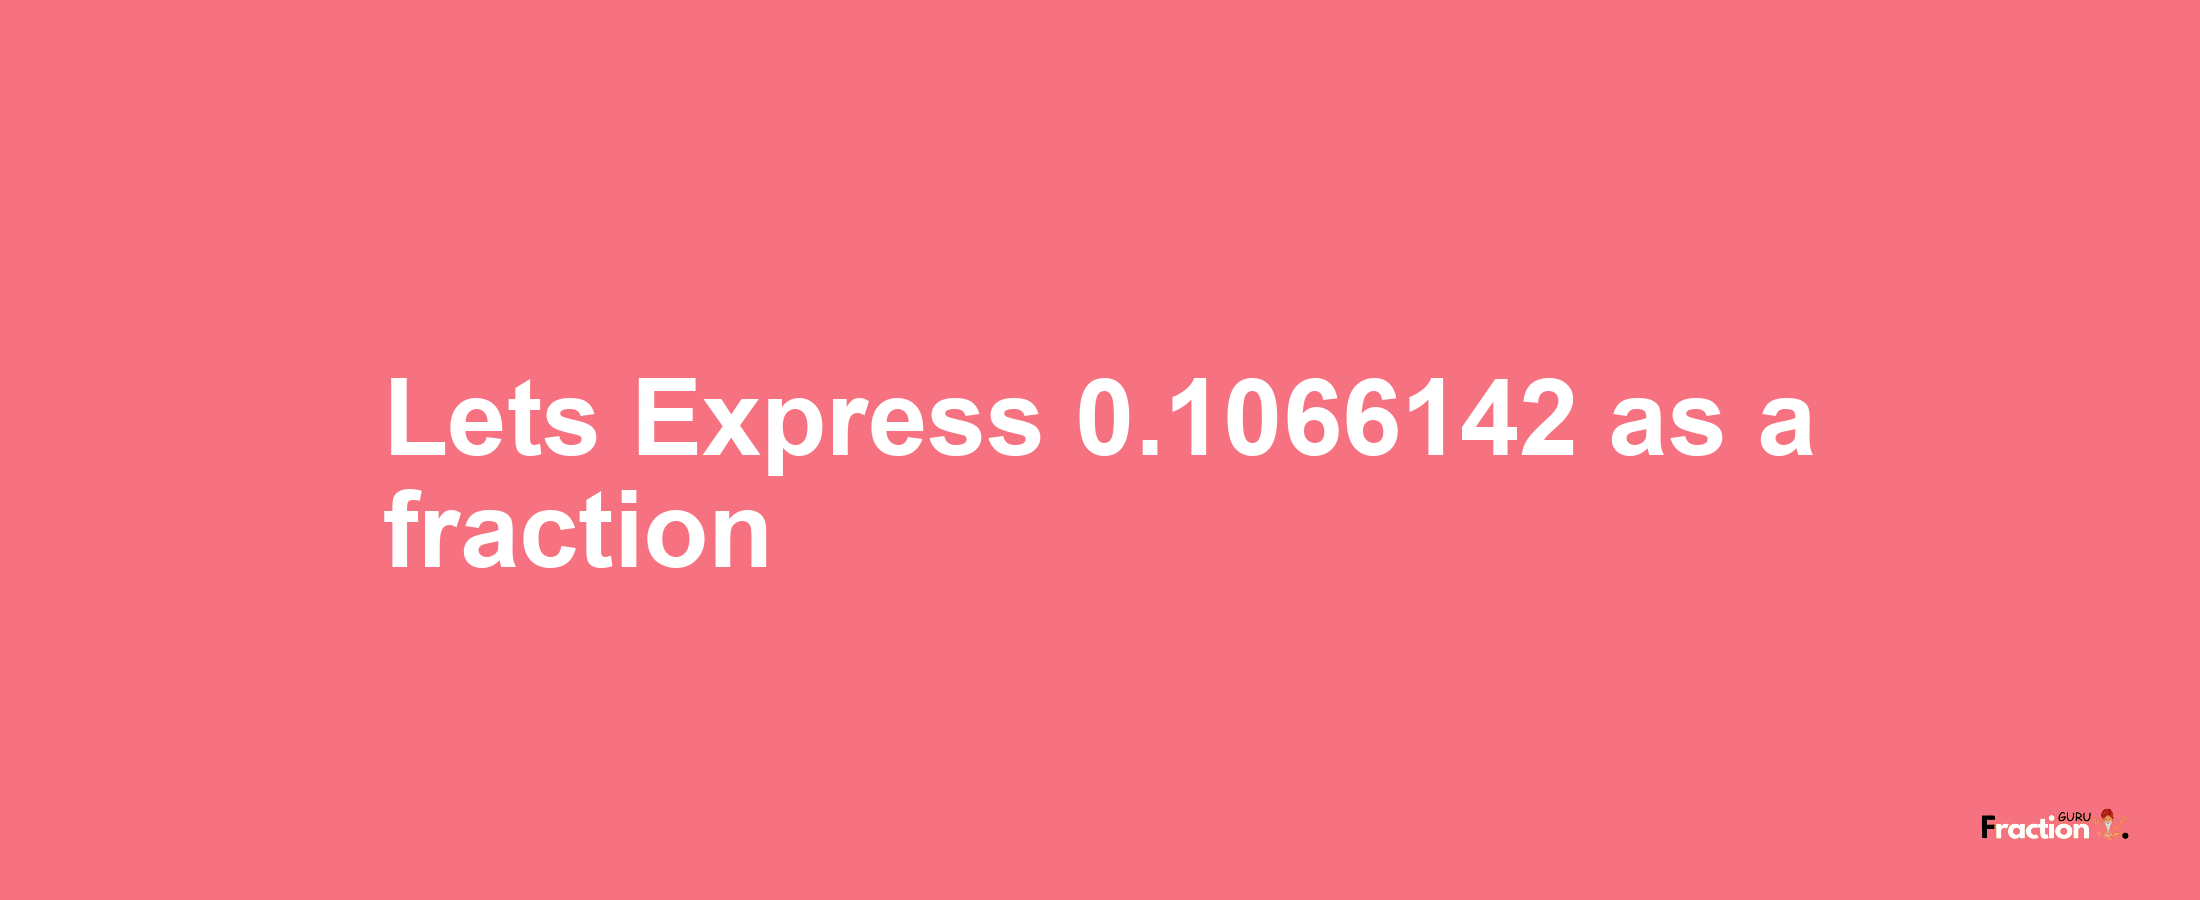 Lets Express 0.1066142 as afraction